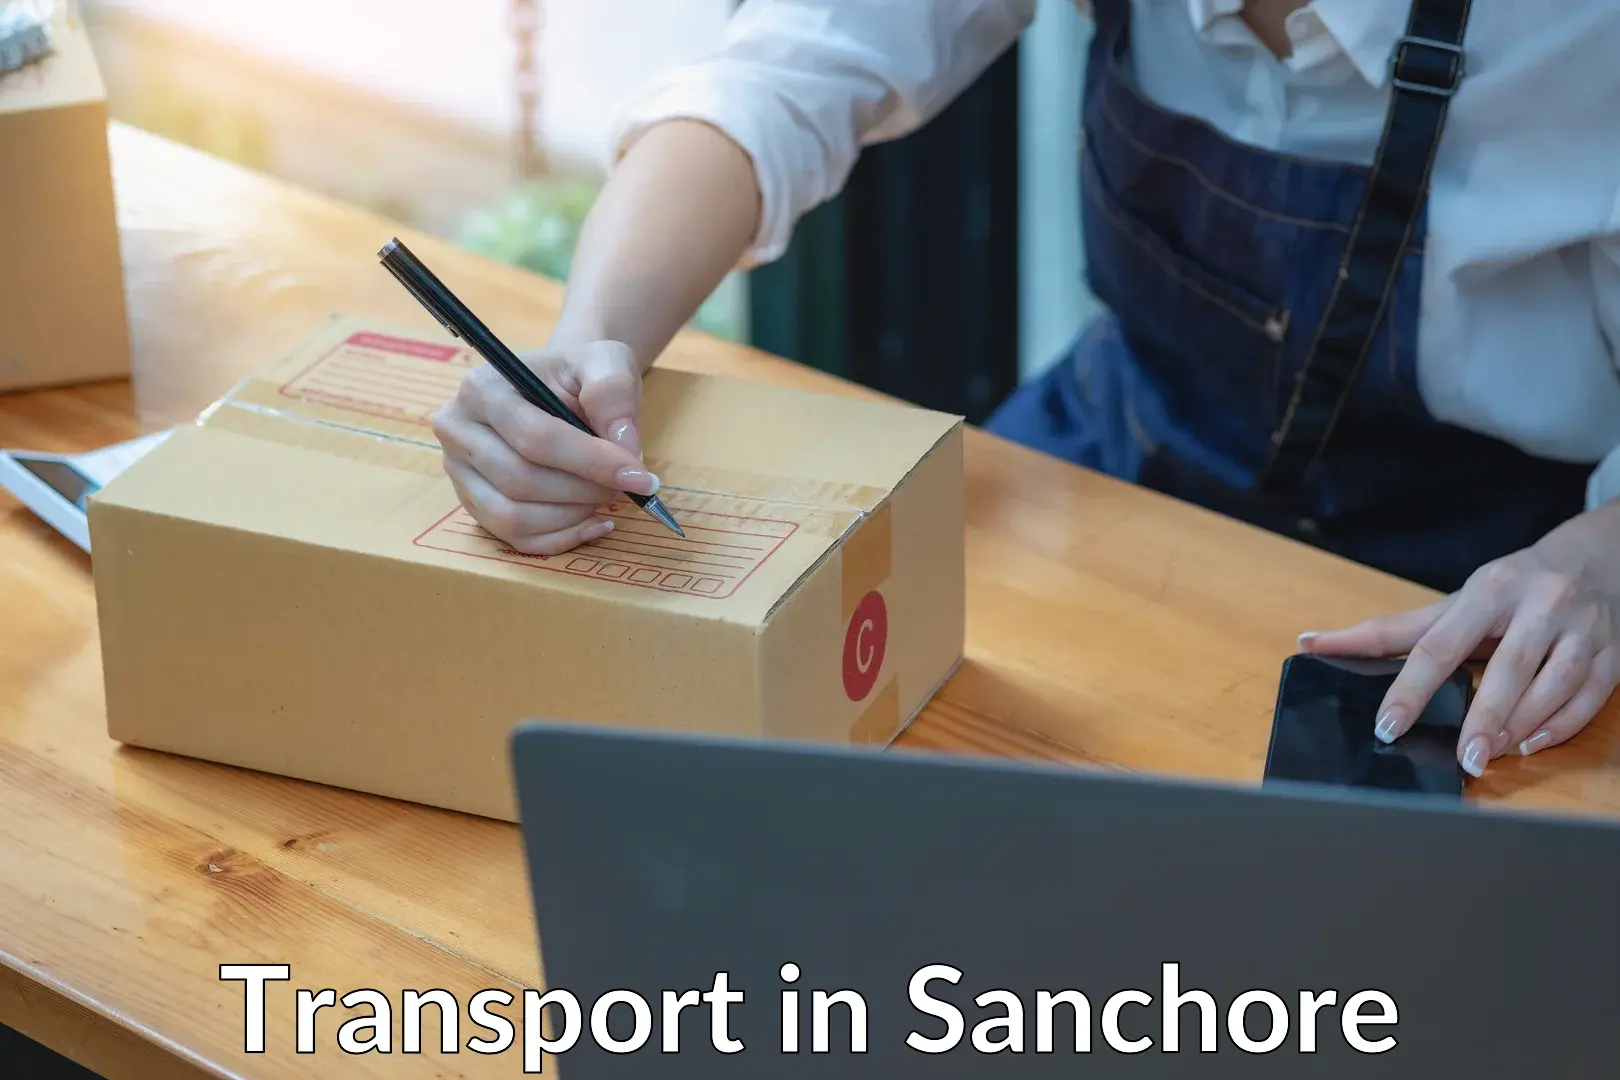 Luggage transport services in Sanchore